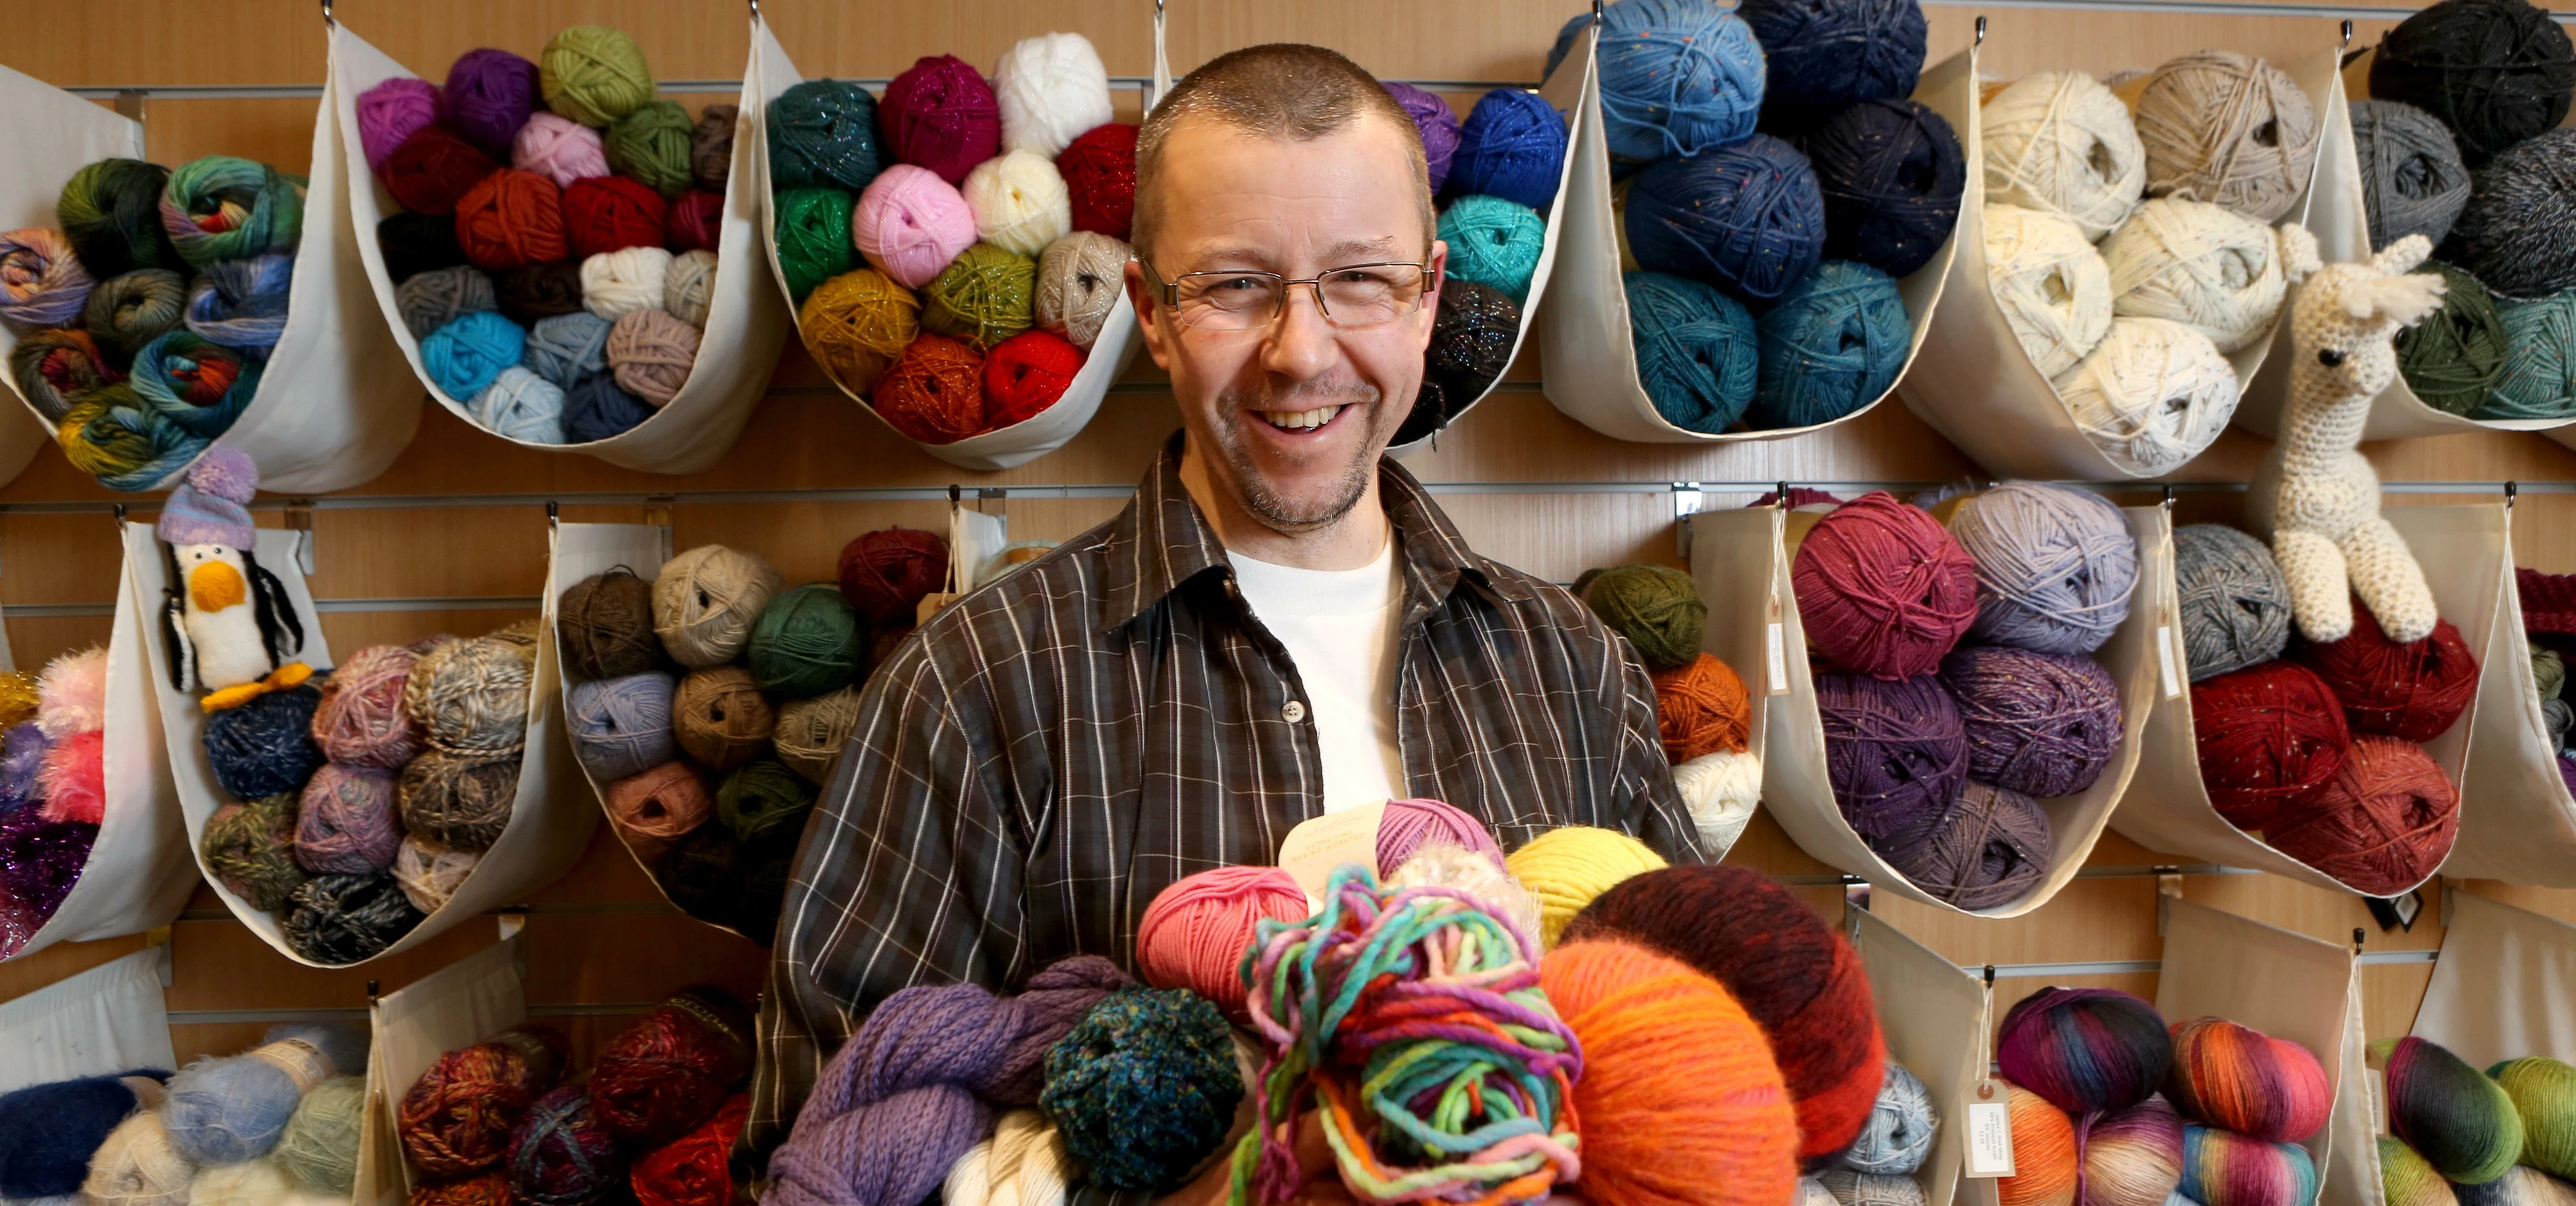 SMD Knitting’s managing director Russell Forrester